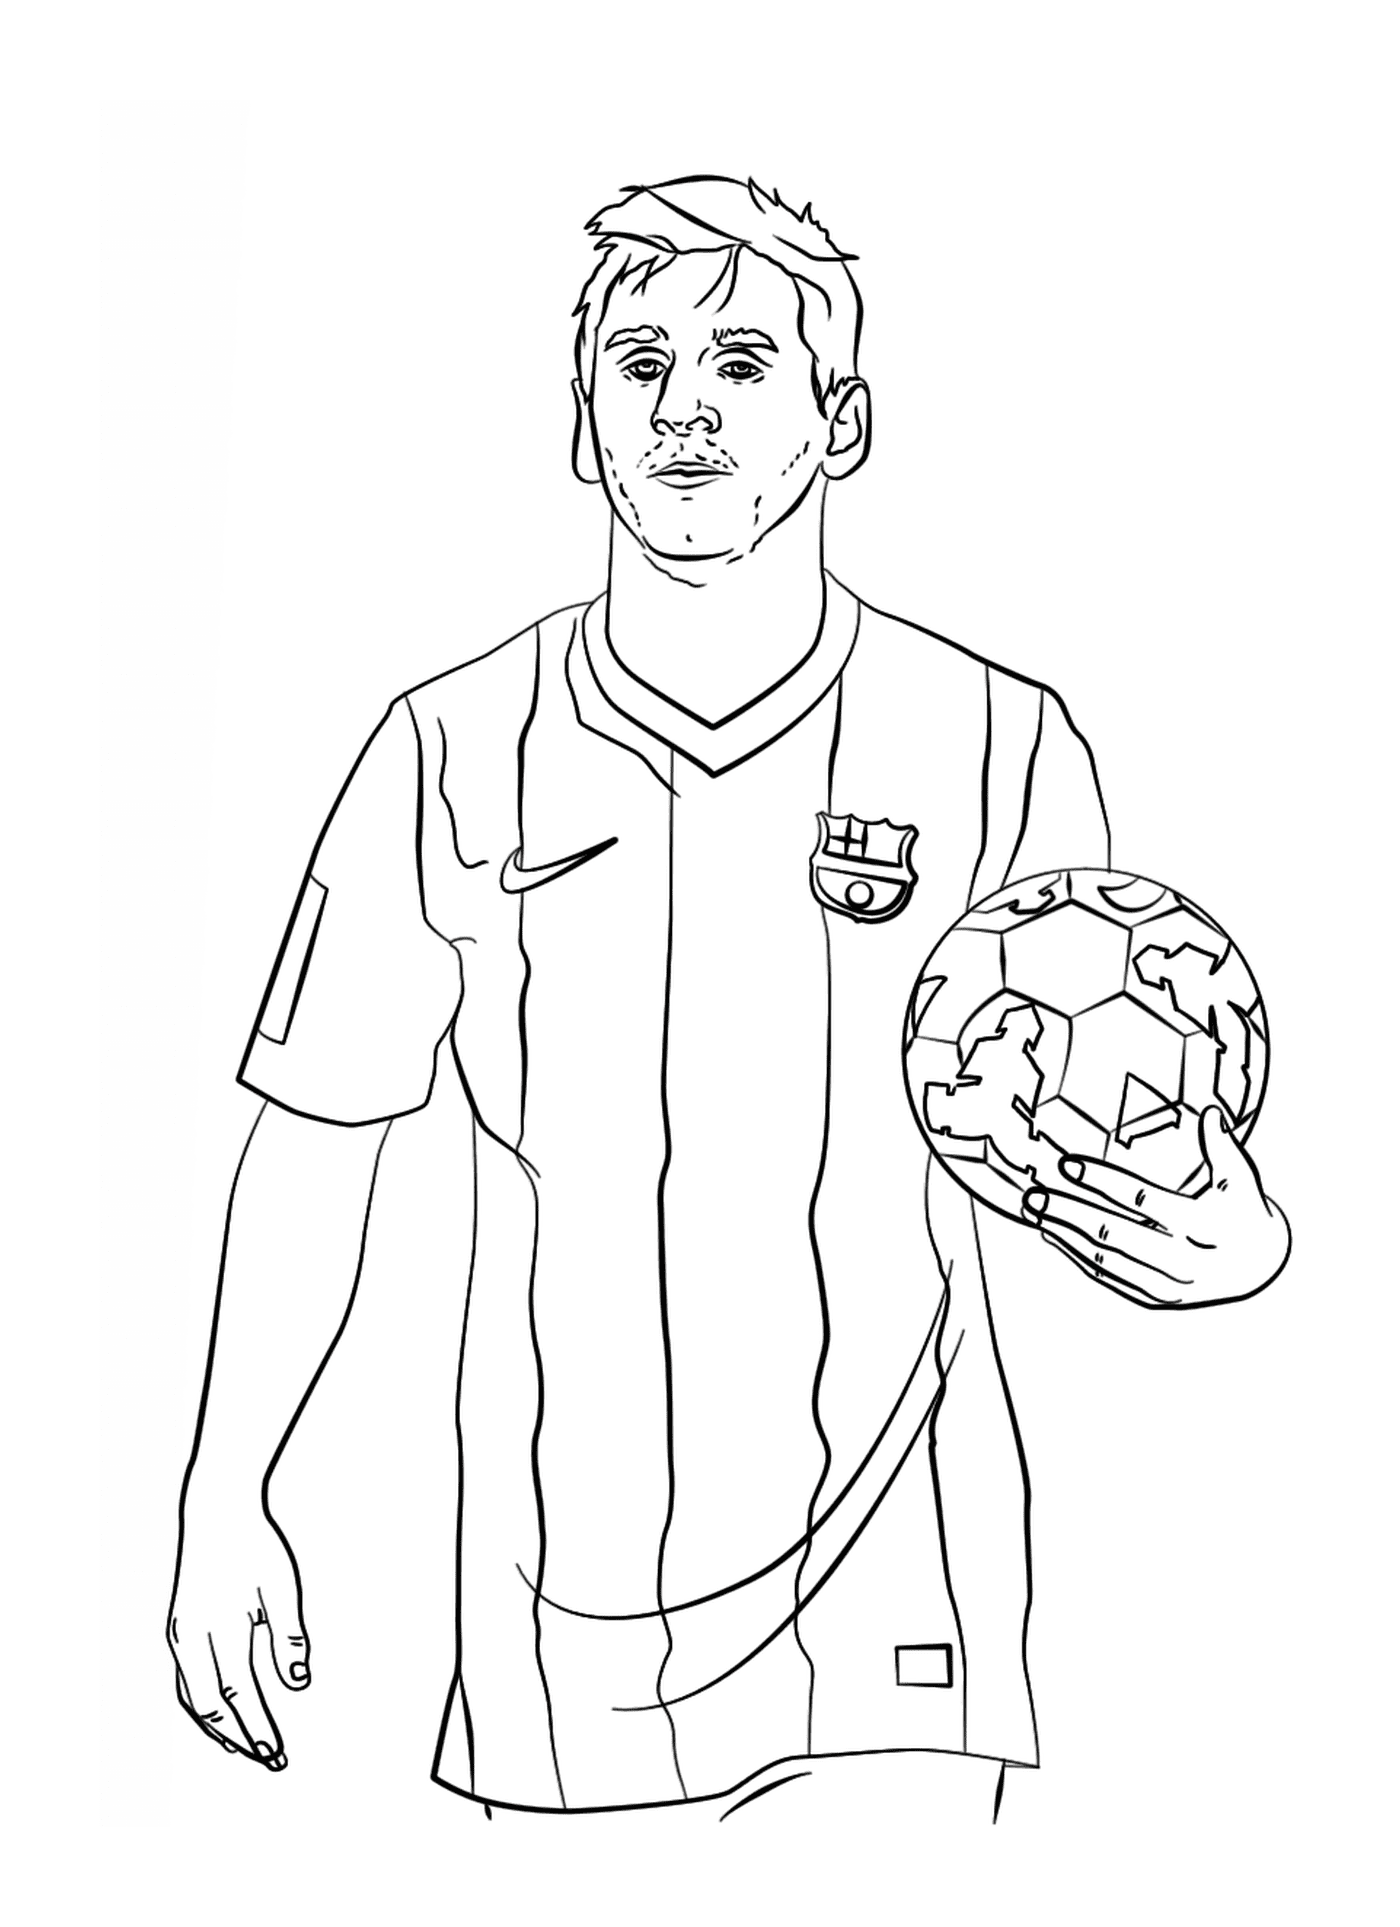  A man holding a football in his hand 